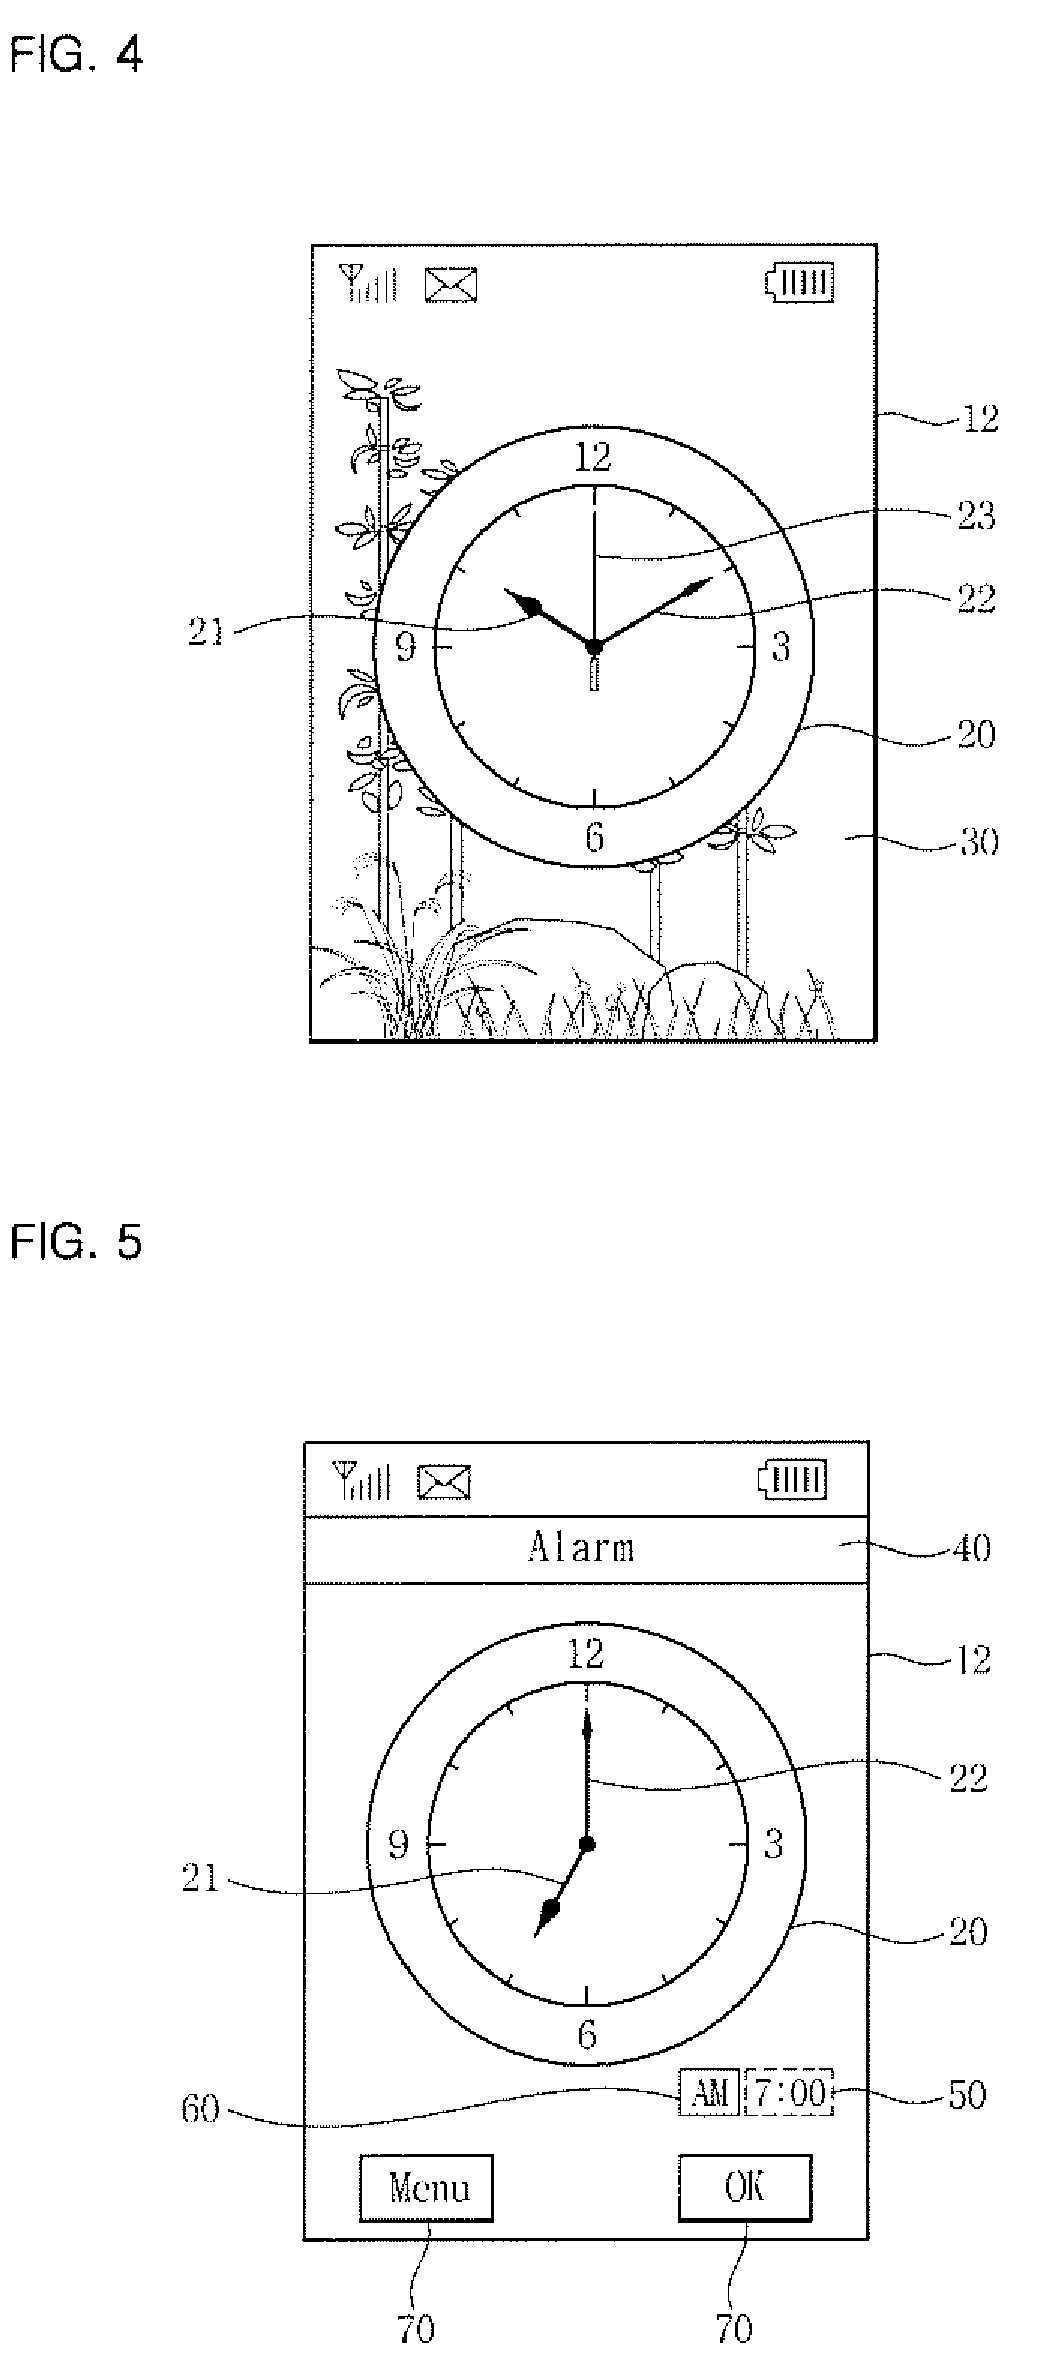 Electronic device with a touchscreen displaying an analog clock